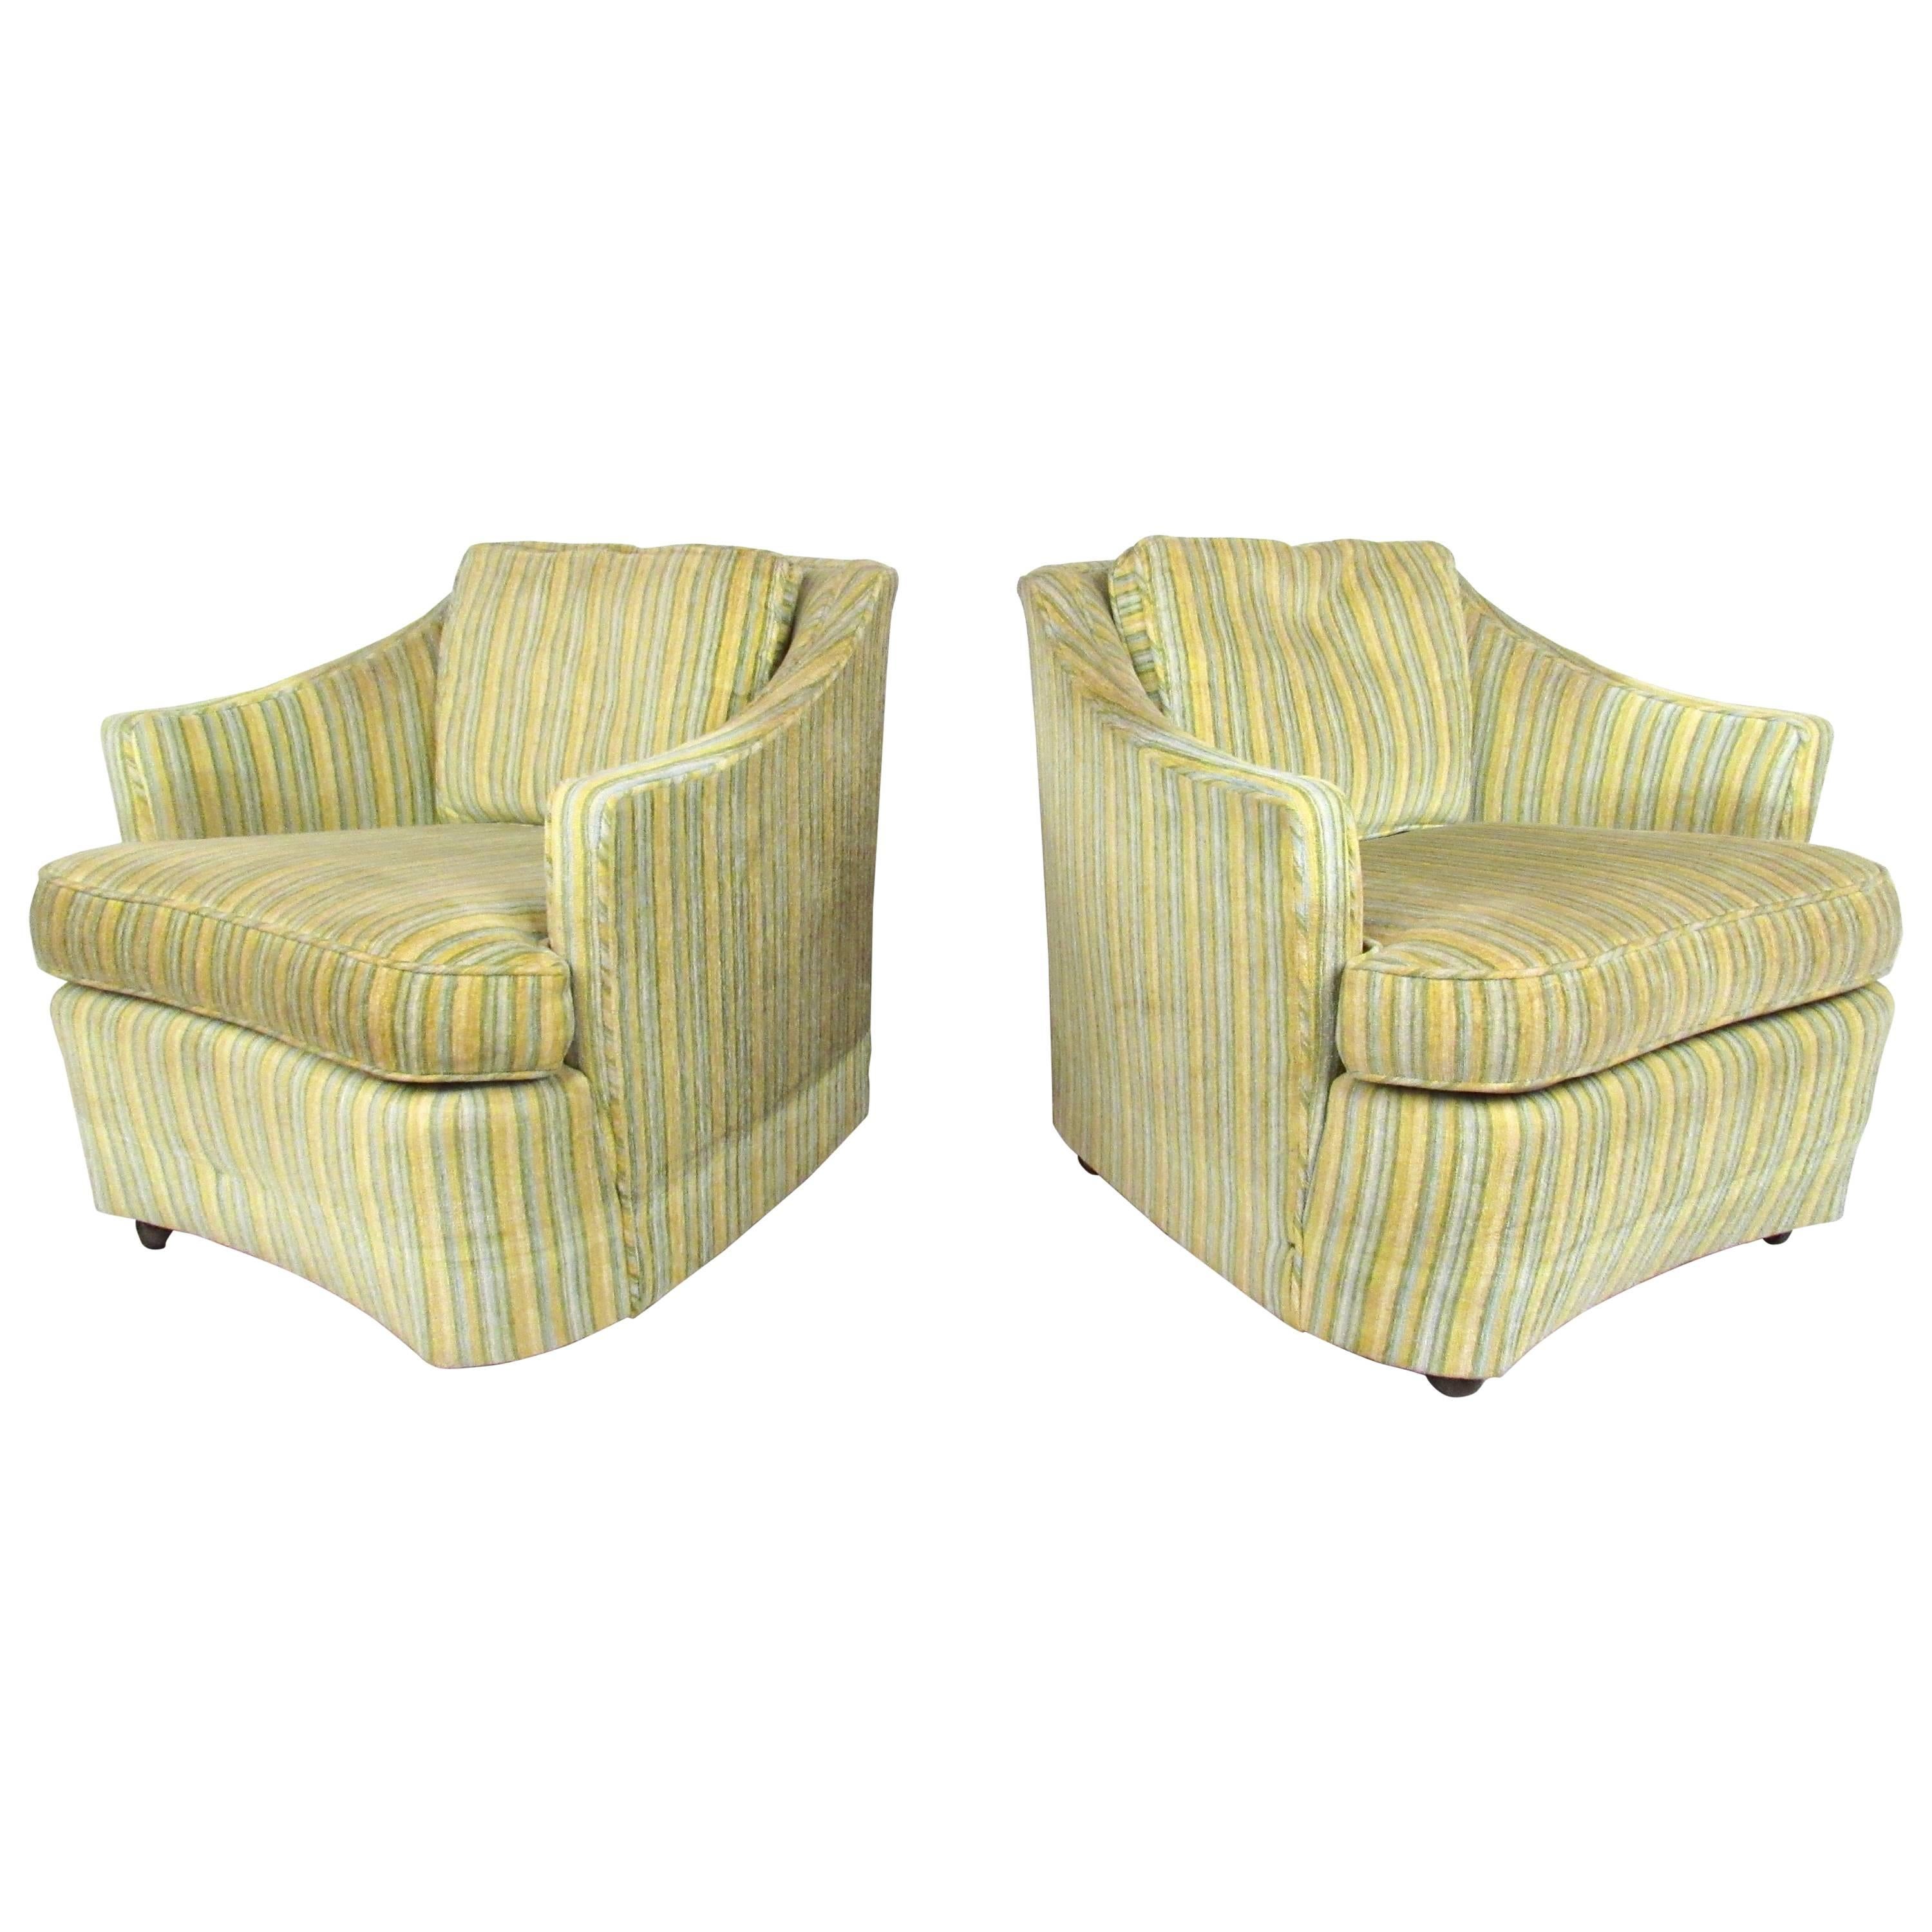 Pair of Mid-Century Modern Lounge Chairs for Heritage Furniture